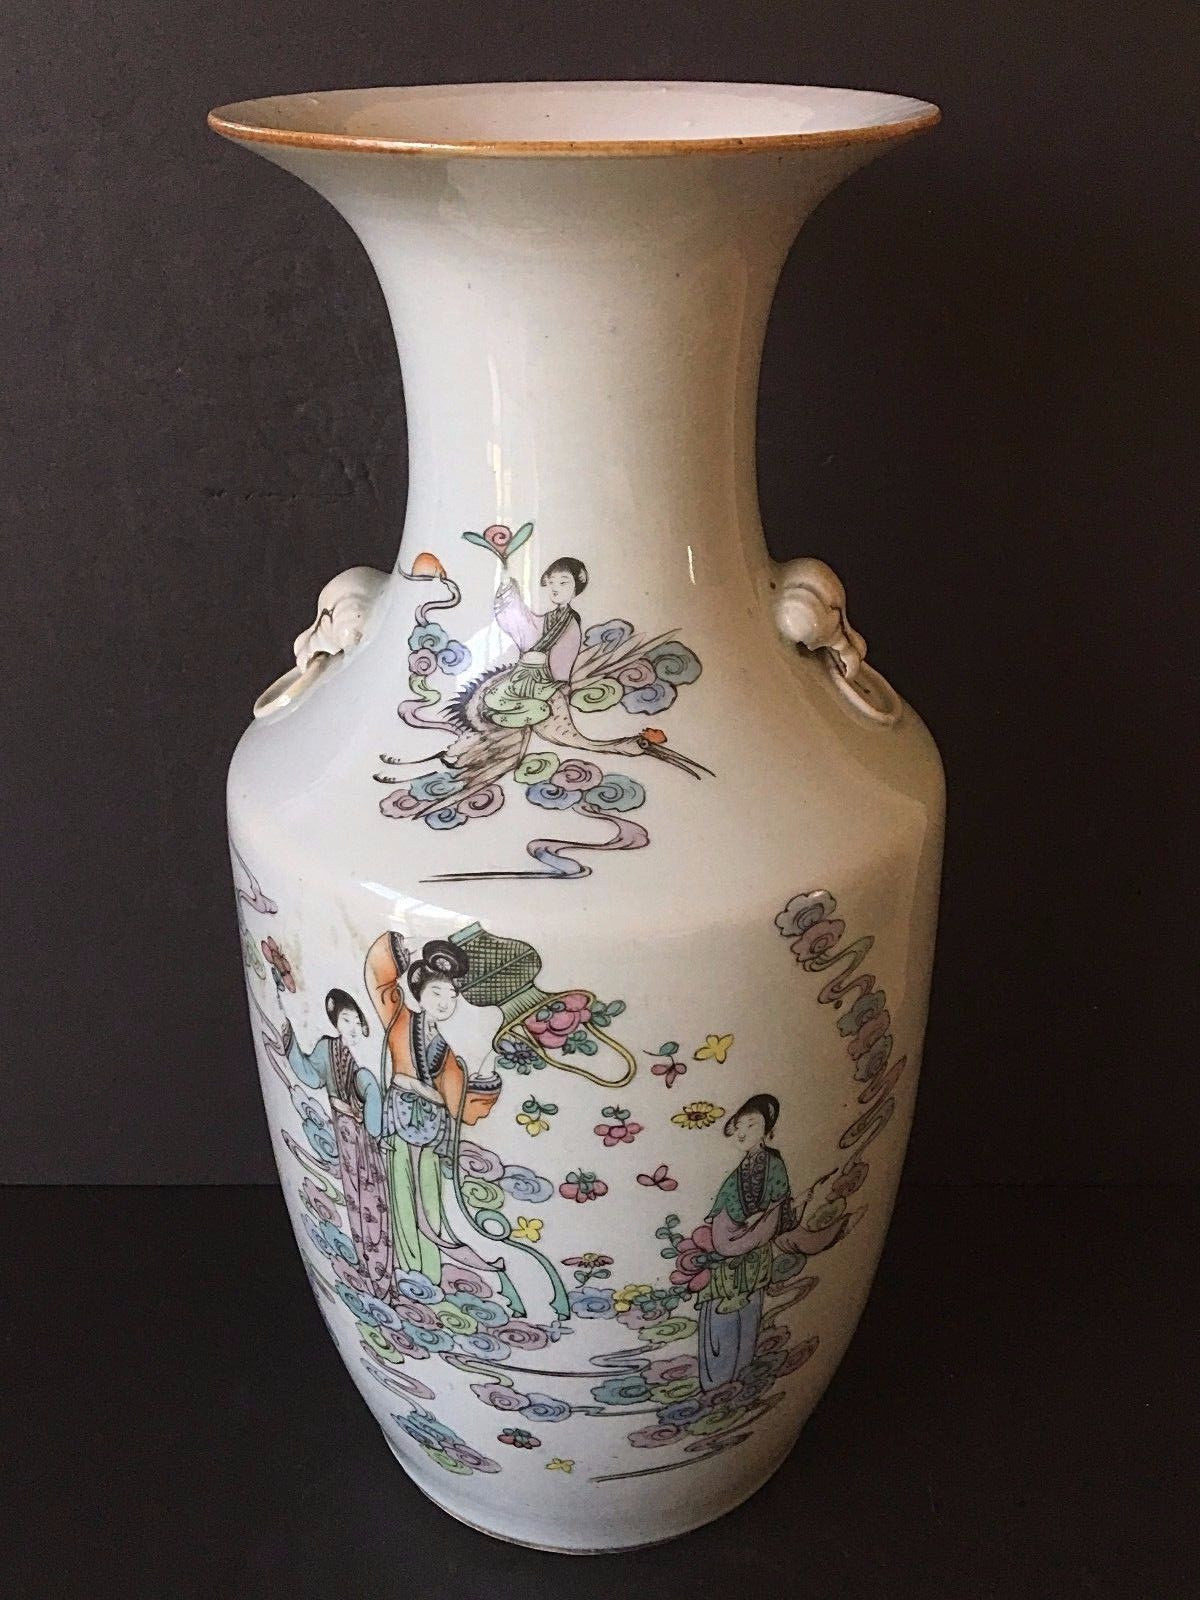 27 Fashionable Famille Rose Porcelain Vase 2024 free download famille rose porcelain vase of large urn vase photos antiques gifts chinese antique 19th century in large urn vase photos antiques gifts chinese antique 19th century large porcelain famille 